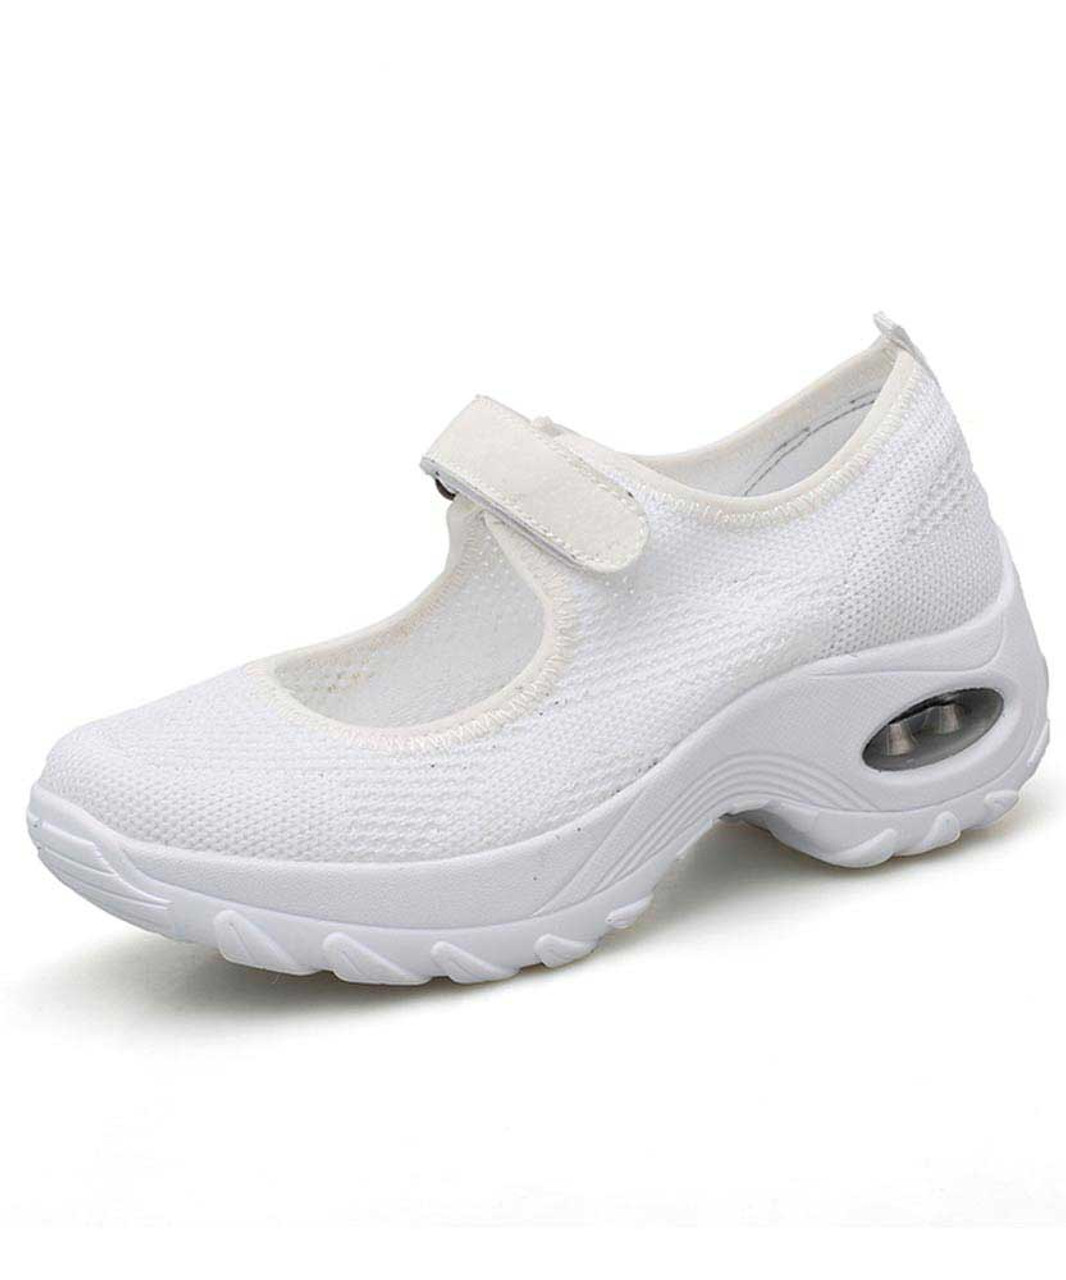 womens white sneakers with velcro